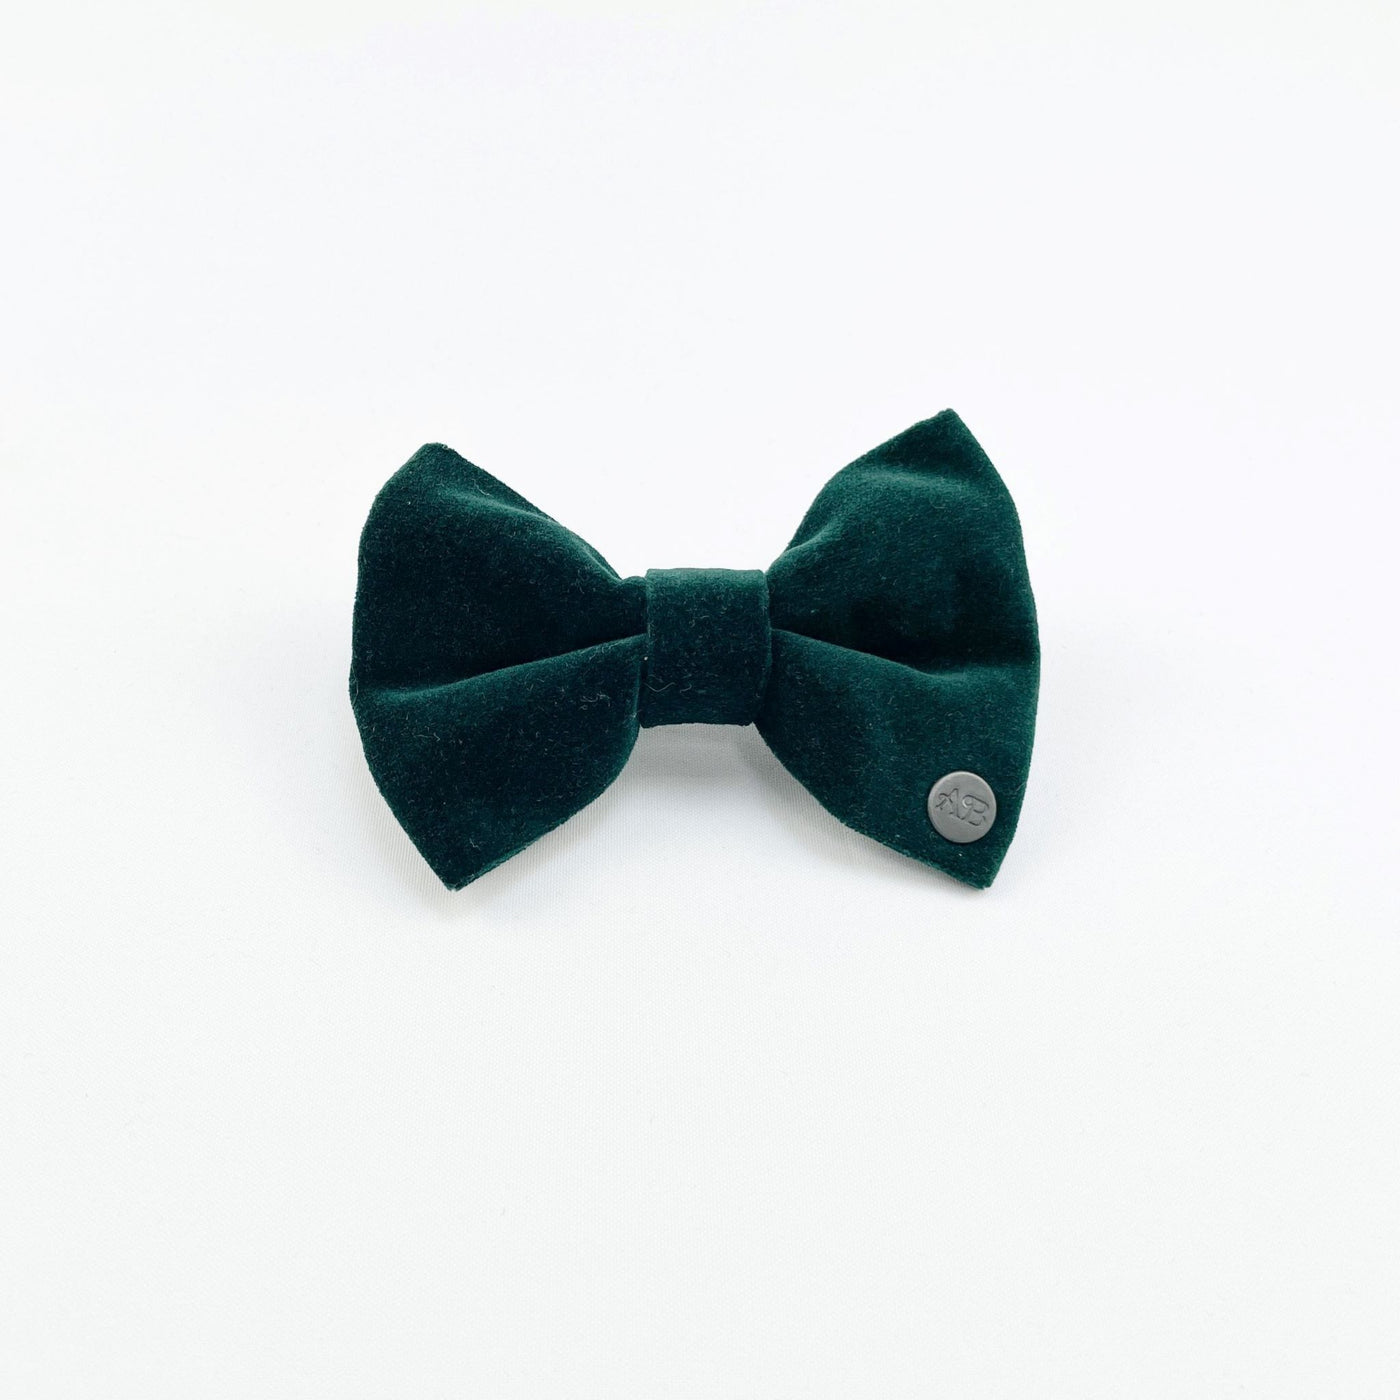 Luxury Emerald Green Velvet Dog Bow Tie from front.